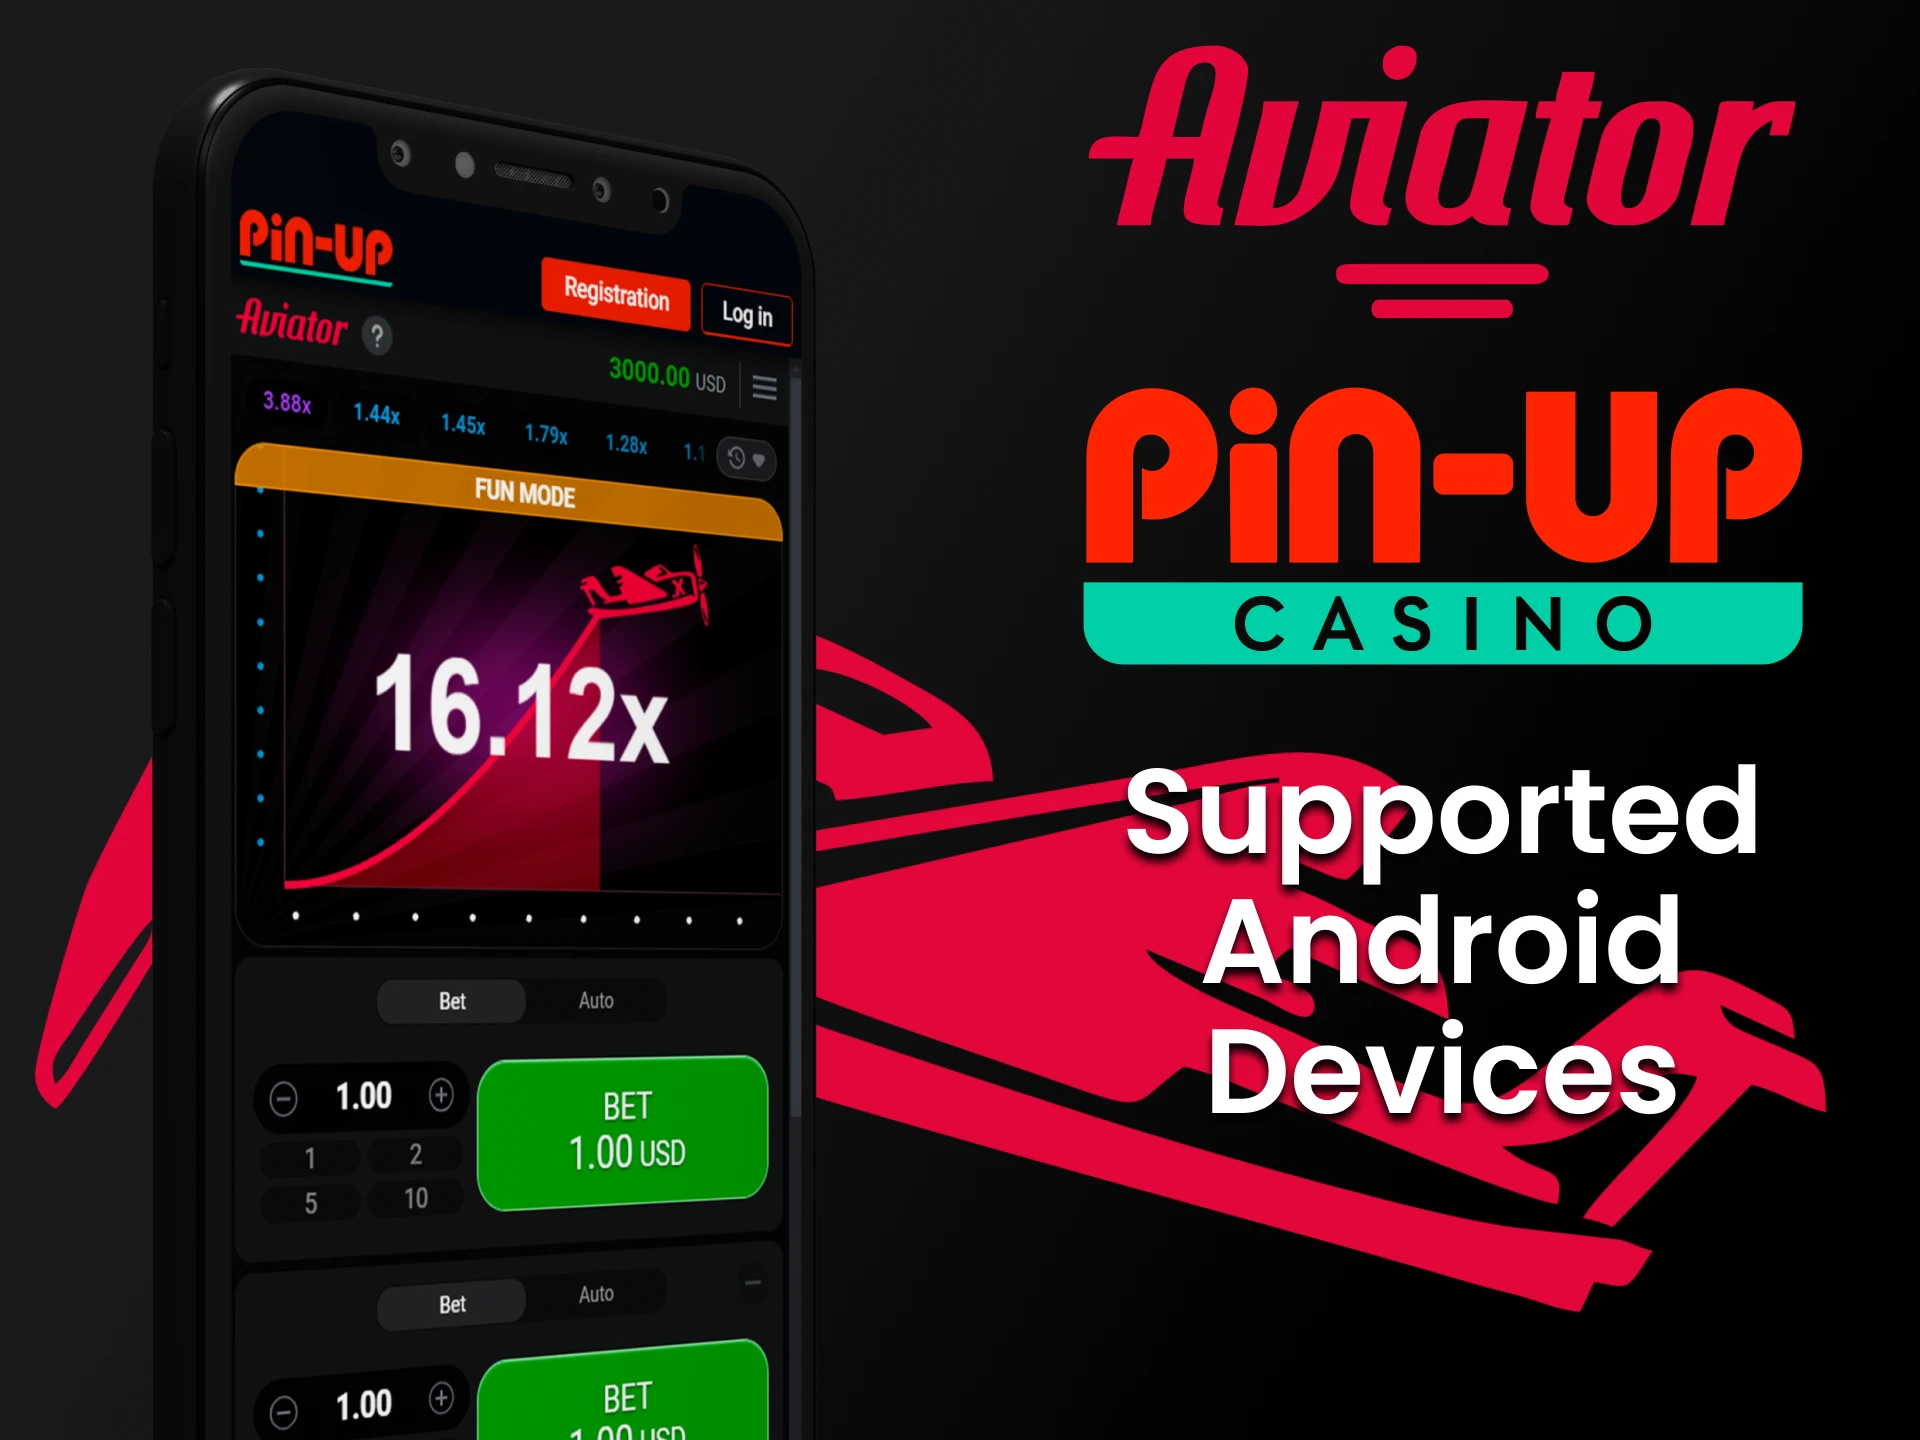 Play Aviator by Pin Up on android devices.